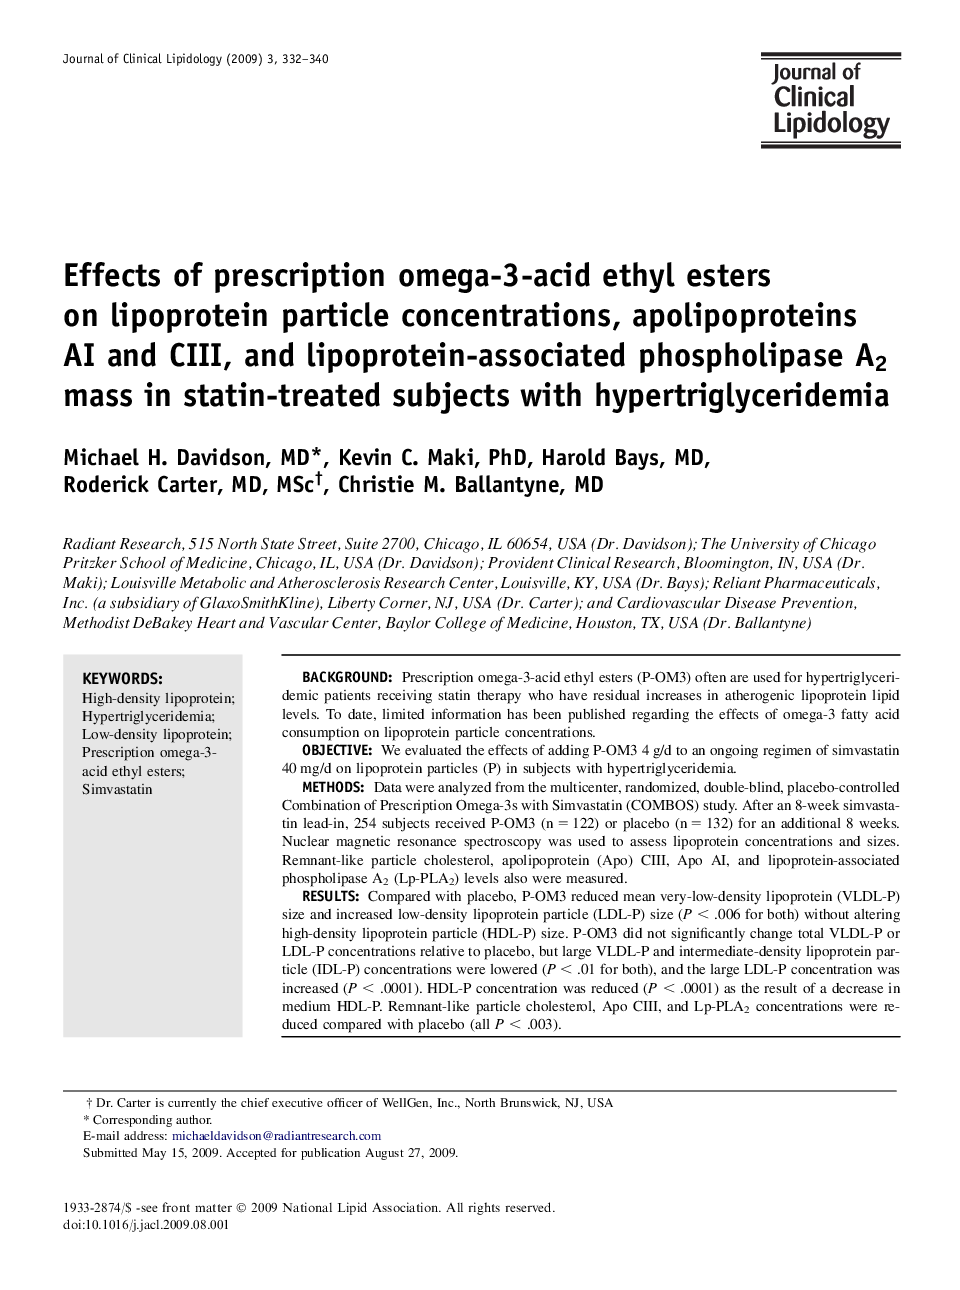 Effects of prescription omega-3-acid ethyl esters on lipoprotein particle concentrations, apolipoproteins AI and CIII, and lipoprotein-associated phospholipase A2 mass in statin-treated subjects with hypertriglyceridemia